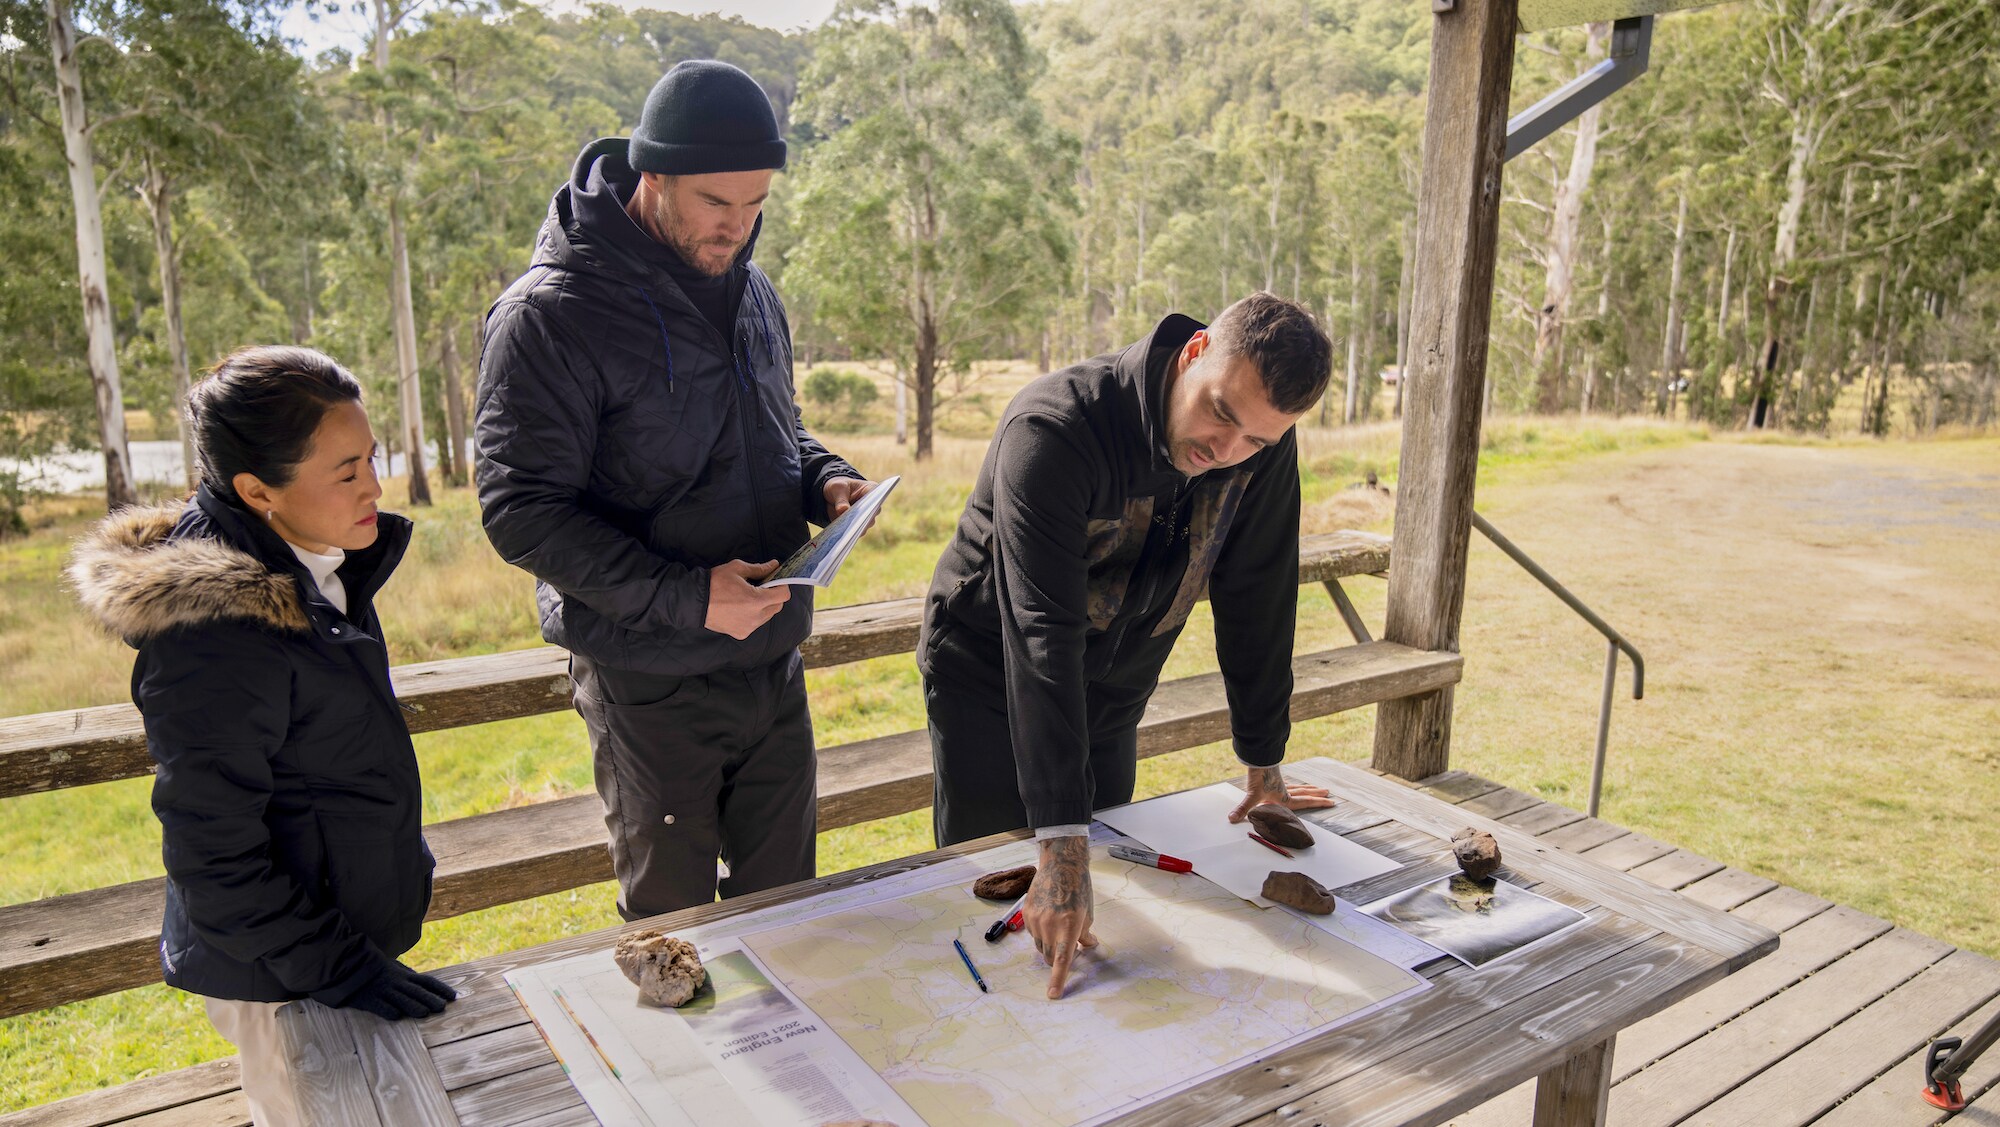 Chris Hemsworth, Otis Carey and Sharon Shah map out the route of their hike. (National Geographic for Disney+/Craig Parry)